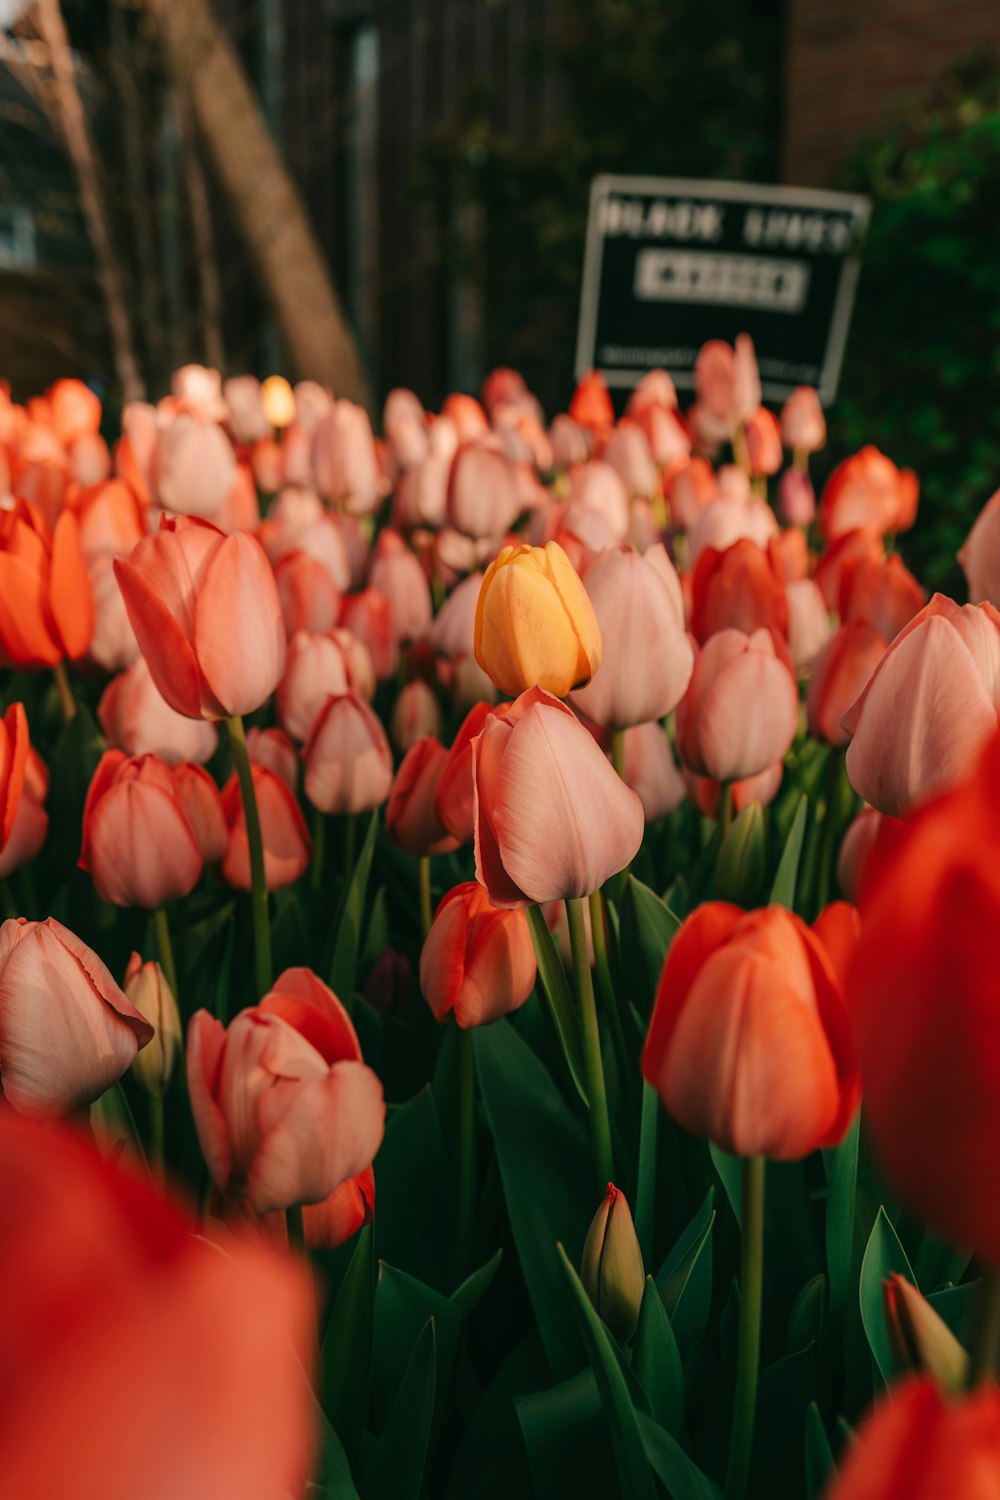 a field of red and pink tulips with a sign in the background